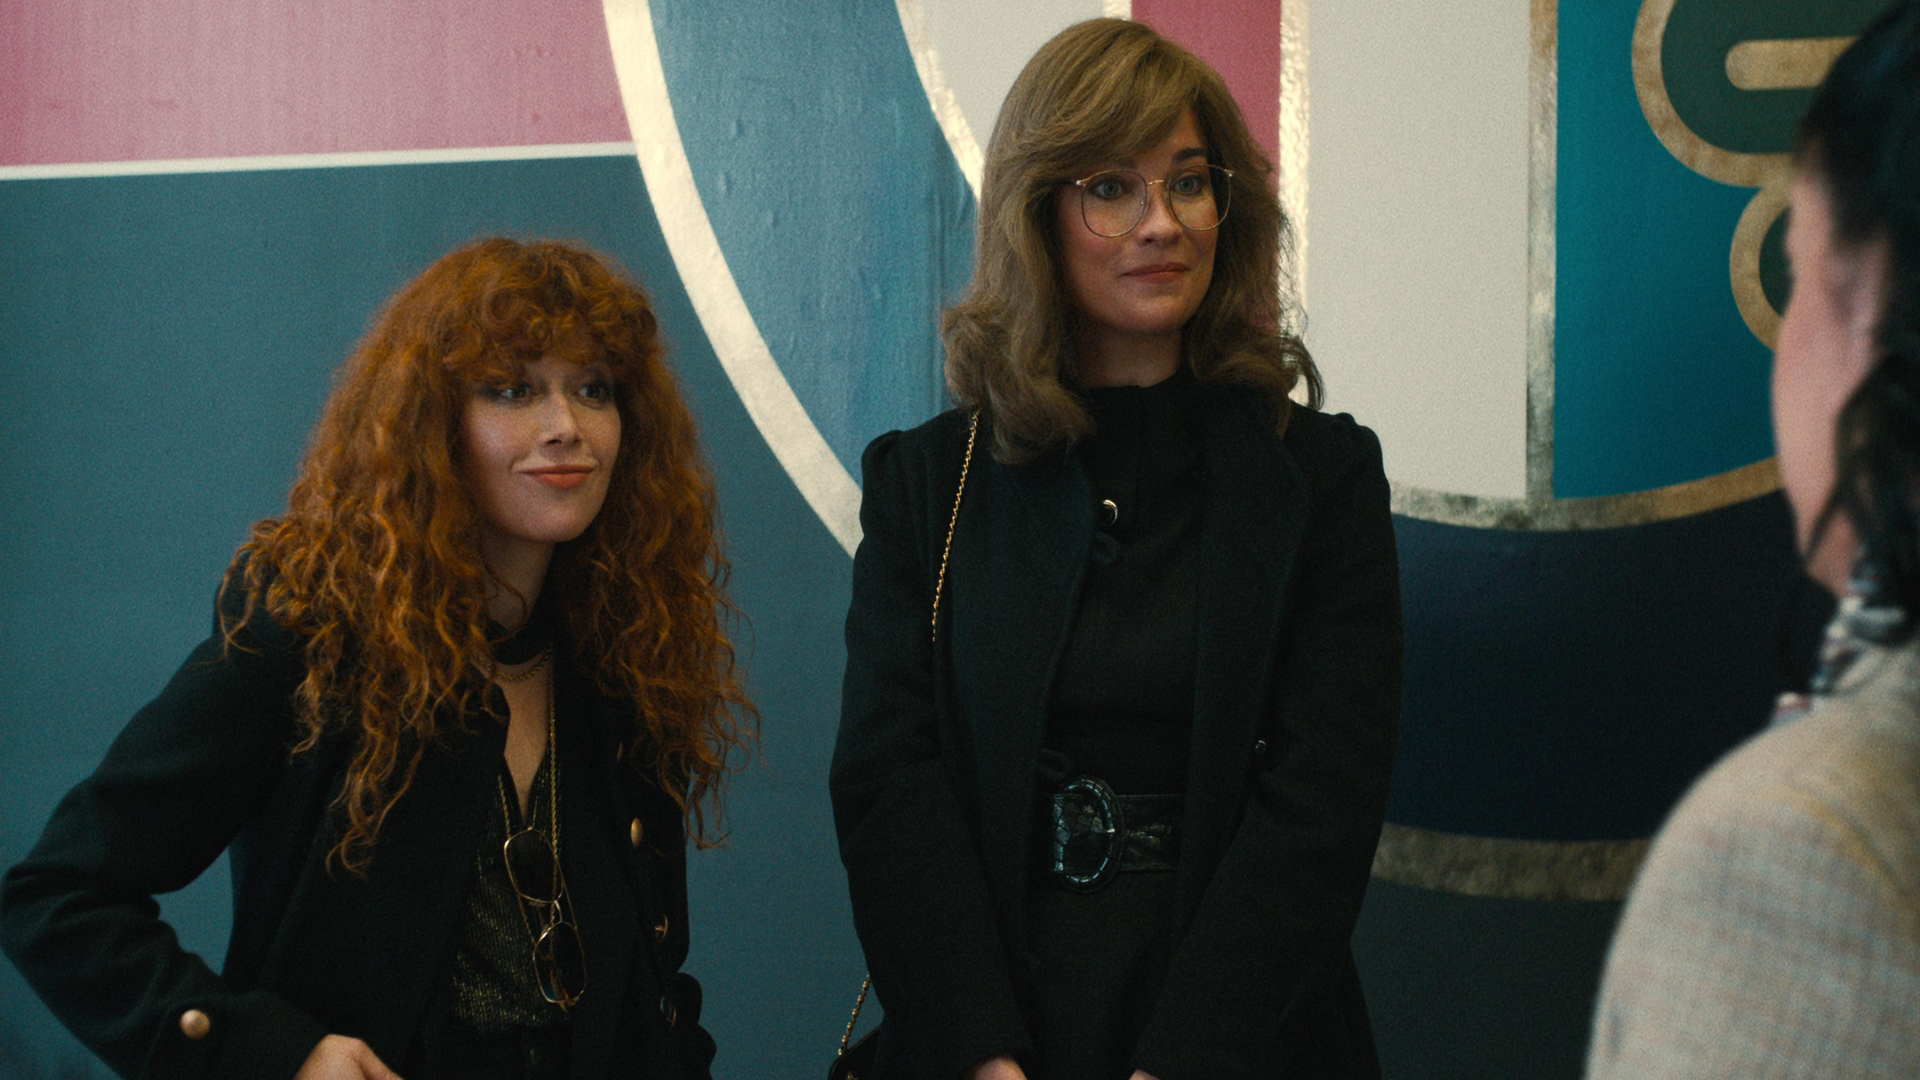 Russian Doll season 2 reviews are in – and critics are calling it a “welcome shift” from season 1